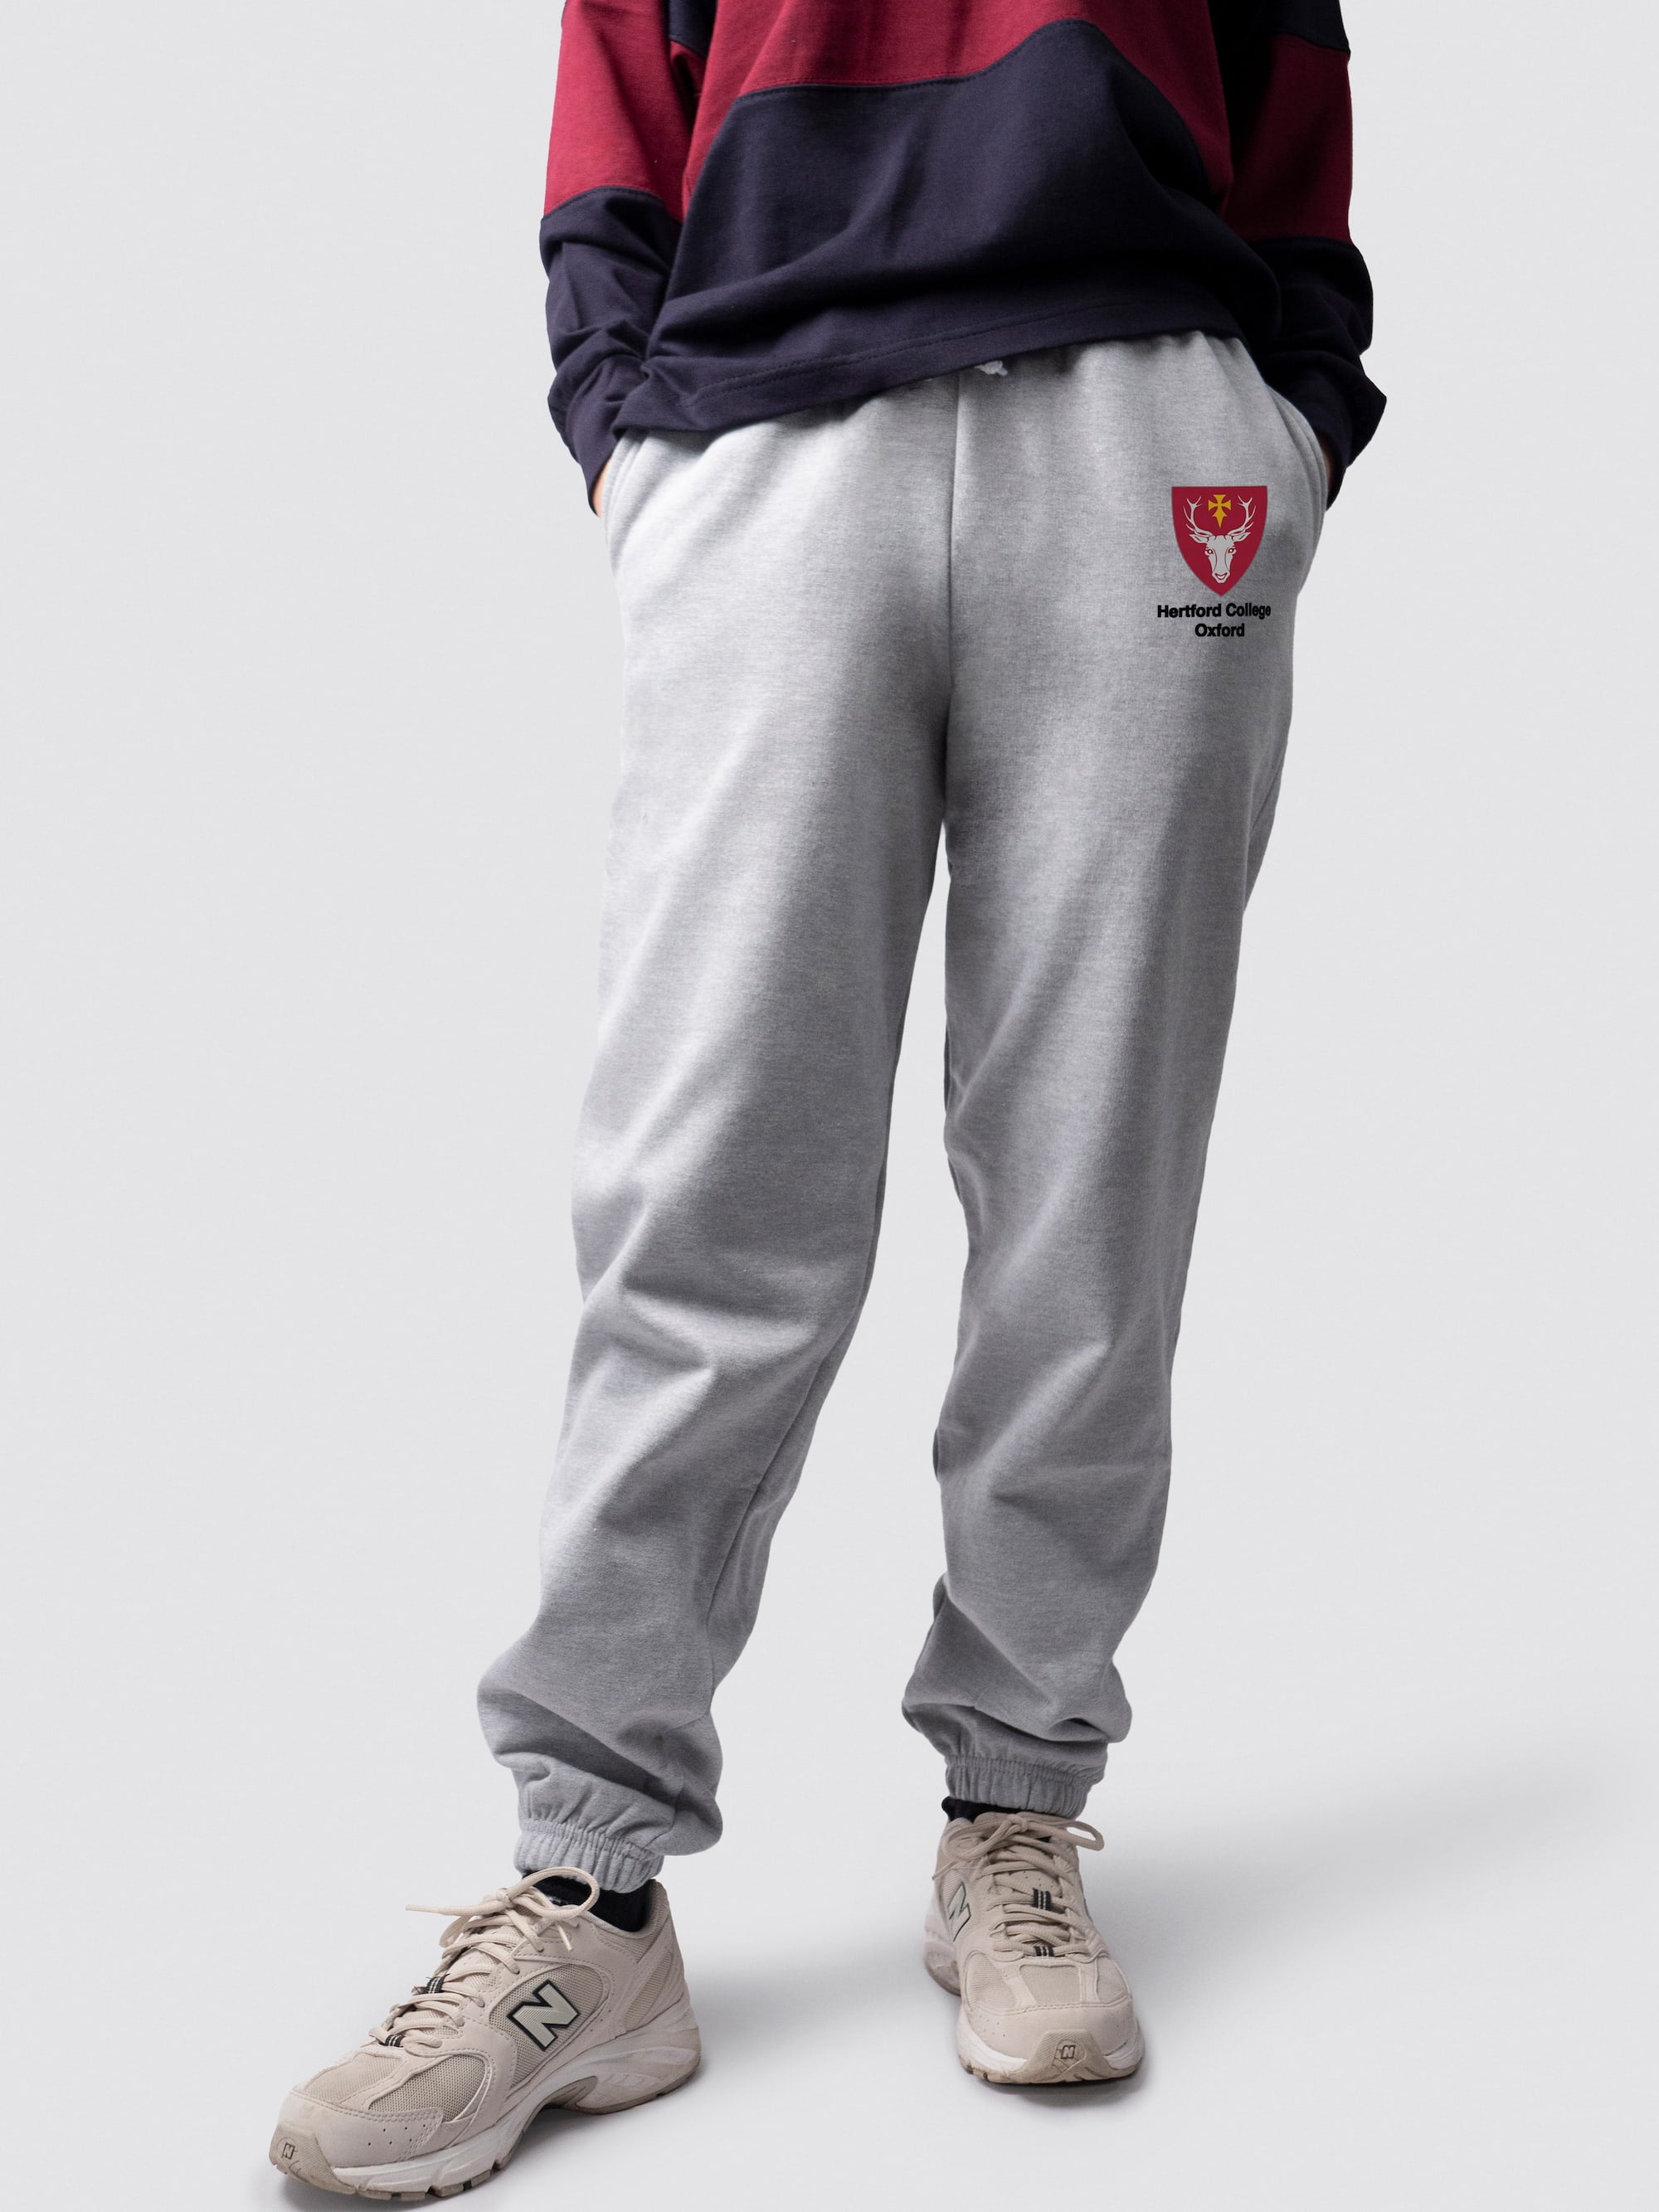 undergraduate cuffed sweatpants, made from soft cotton fabric, with Hertford logo